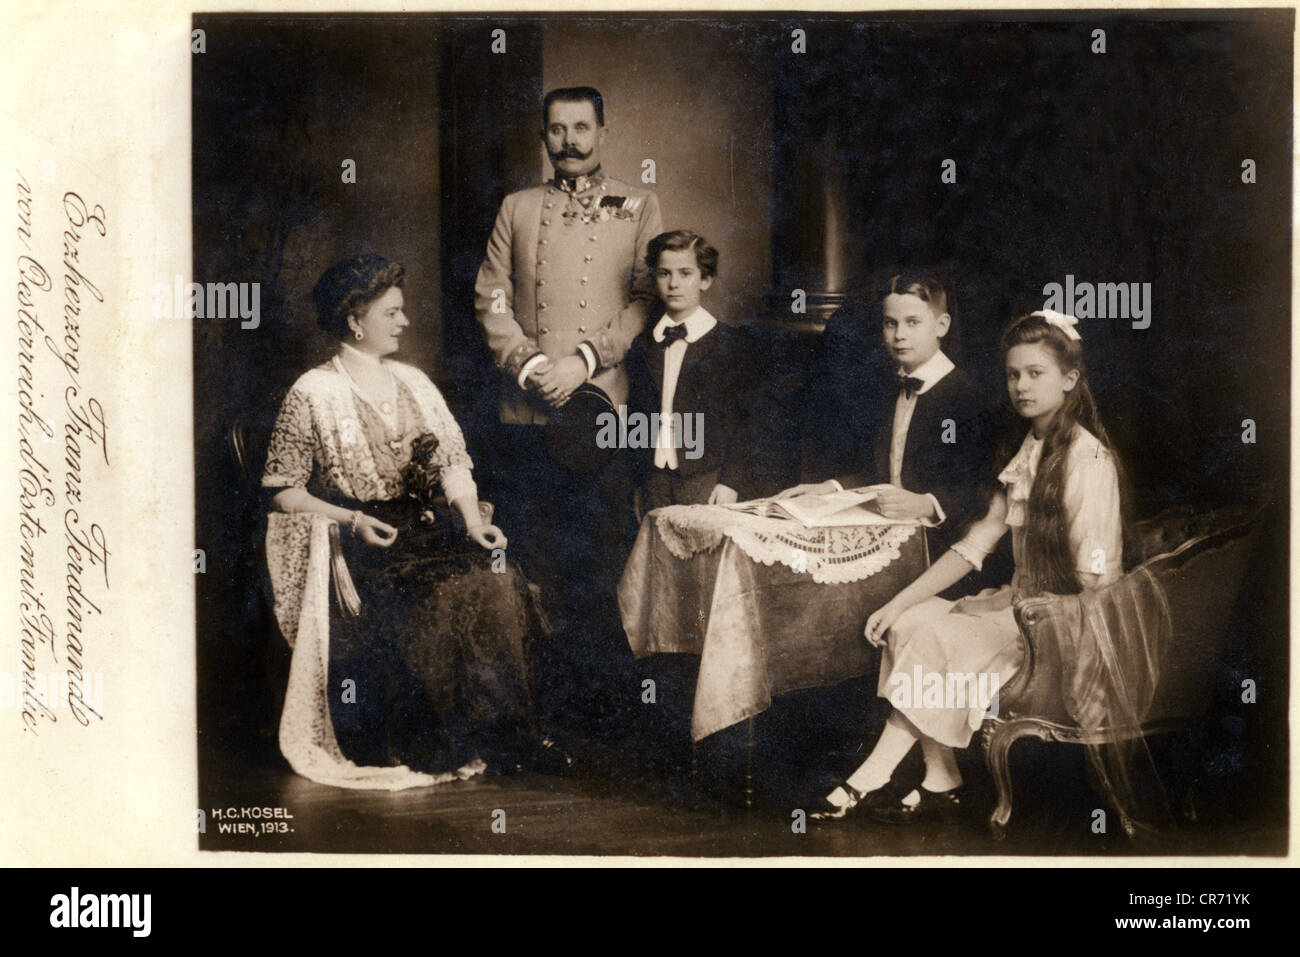 Franz Ferdinand, 18.12.1863 - 28.6.1914, Heir Presumptive of Austria-Hungary 30.1.1889 - 28.6.1914, with family, picture postcard by  H. C. Kosel, Vienna, 1913, , Stock Photo